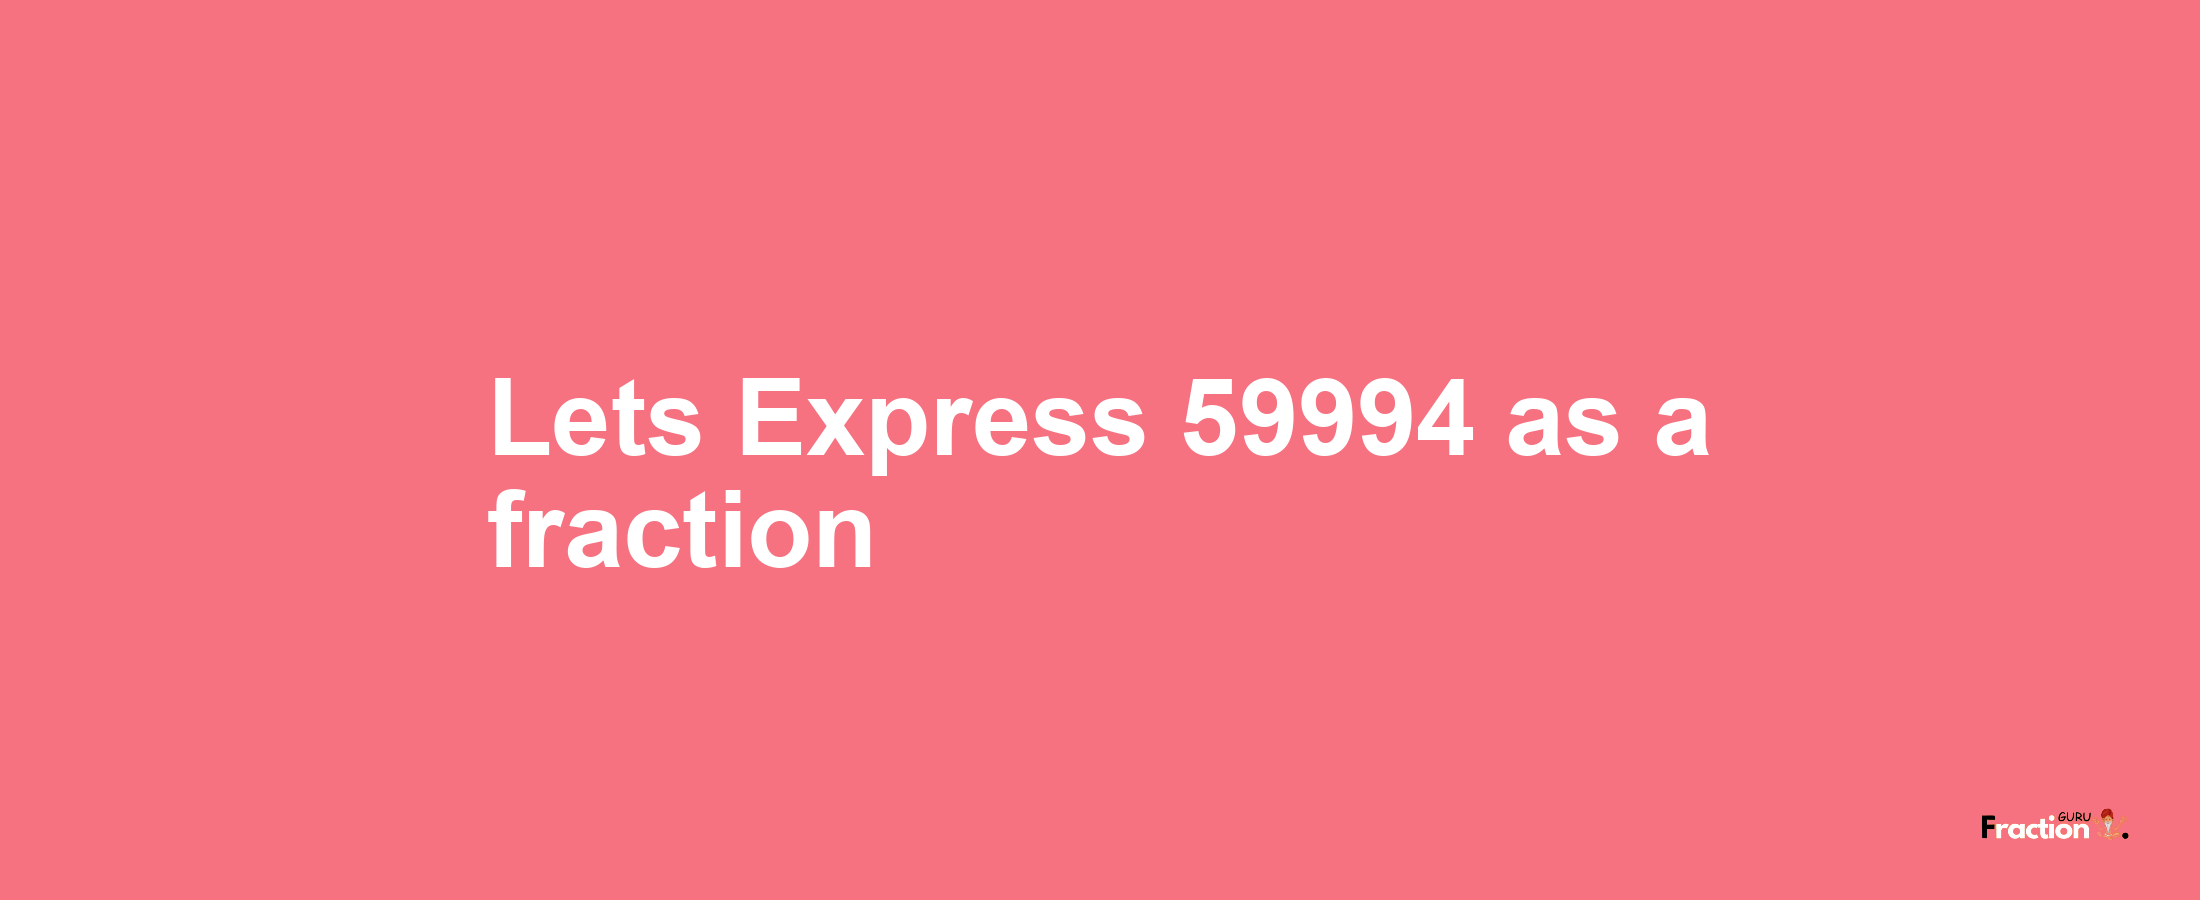 Lets Express 59994 as afraction